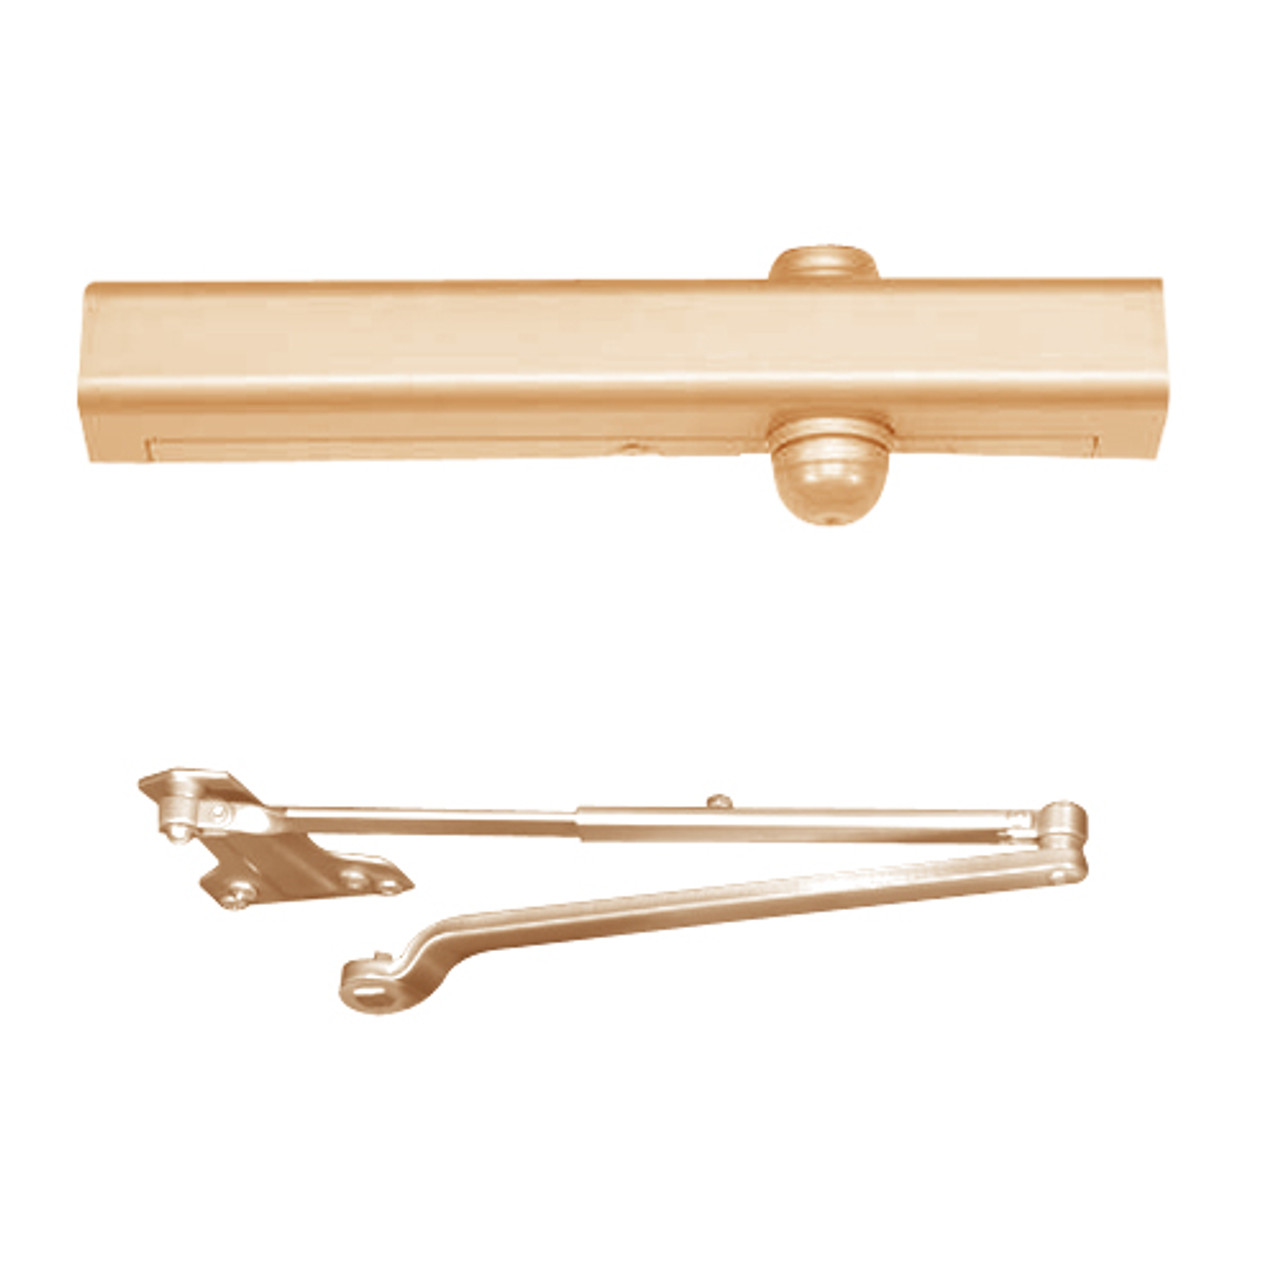 PR3301-691 Yale 3000 Series Architectural Door Closer with Parallel Rigid Arm in Light Bronze